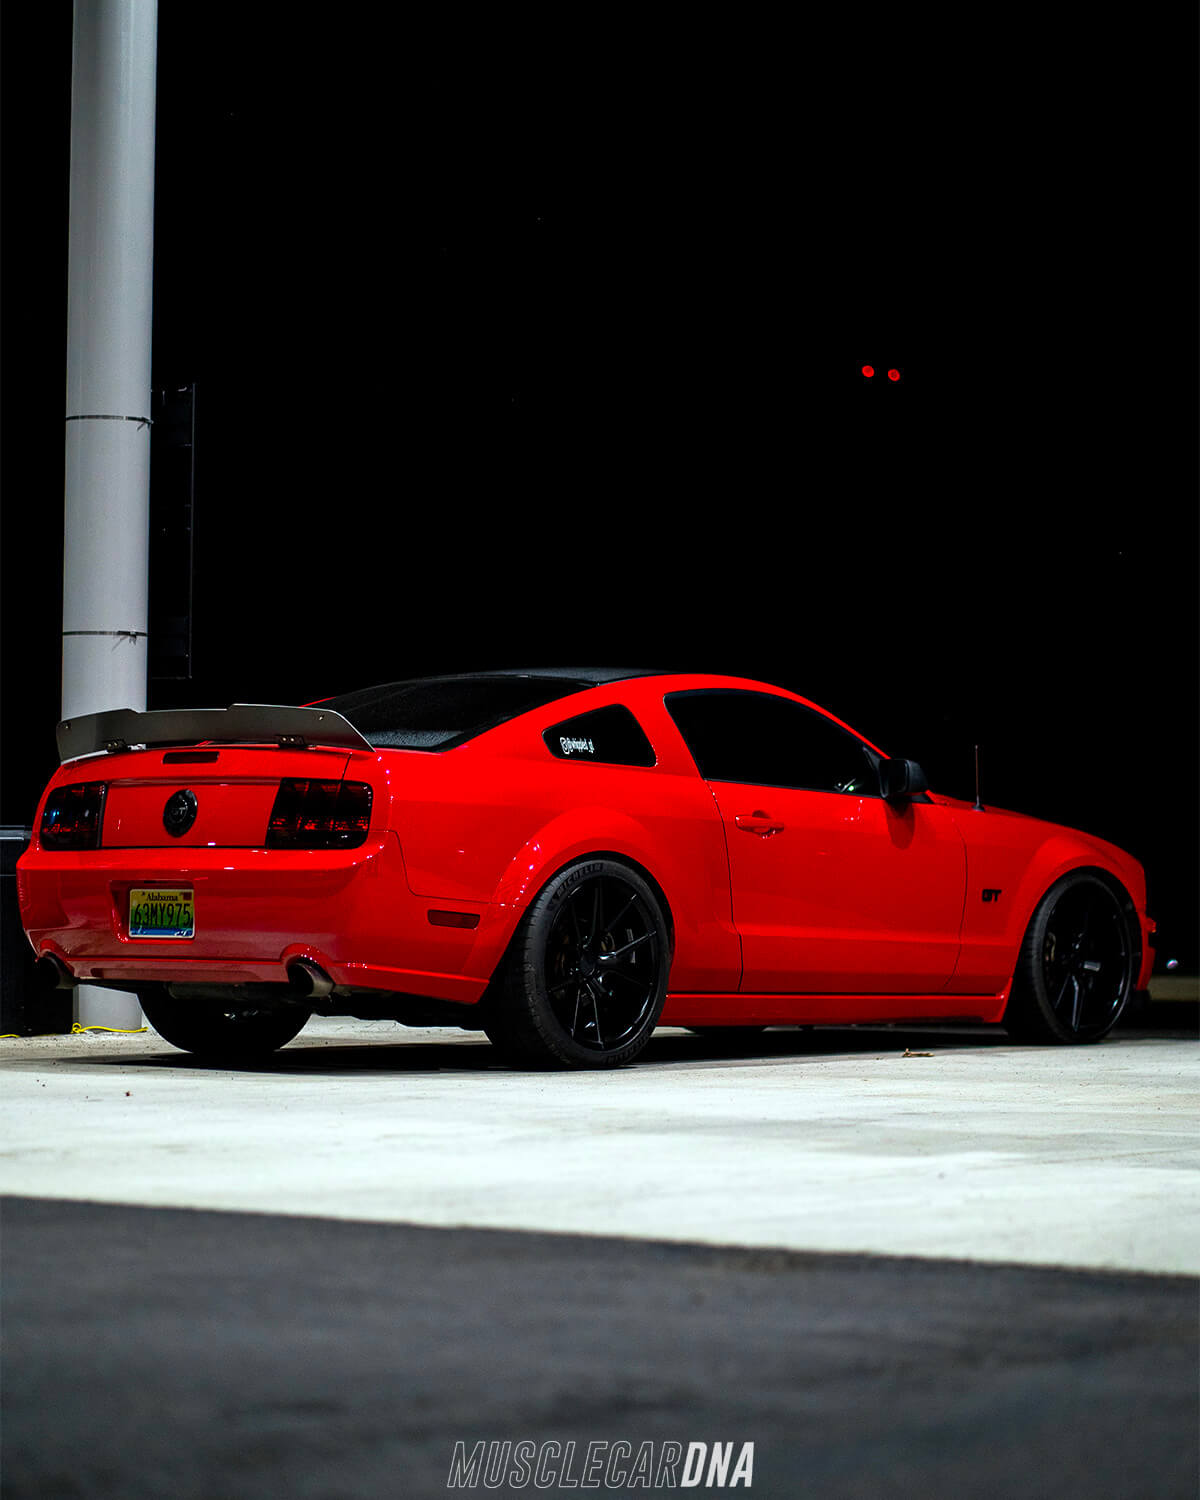 Ford Mustang S197 with stanglights custom black housing turn signals